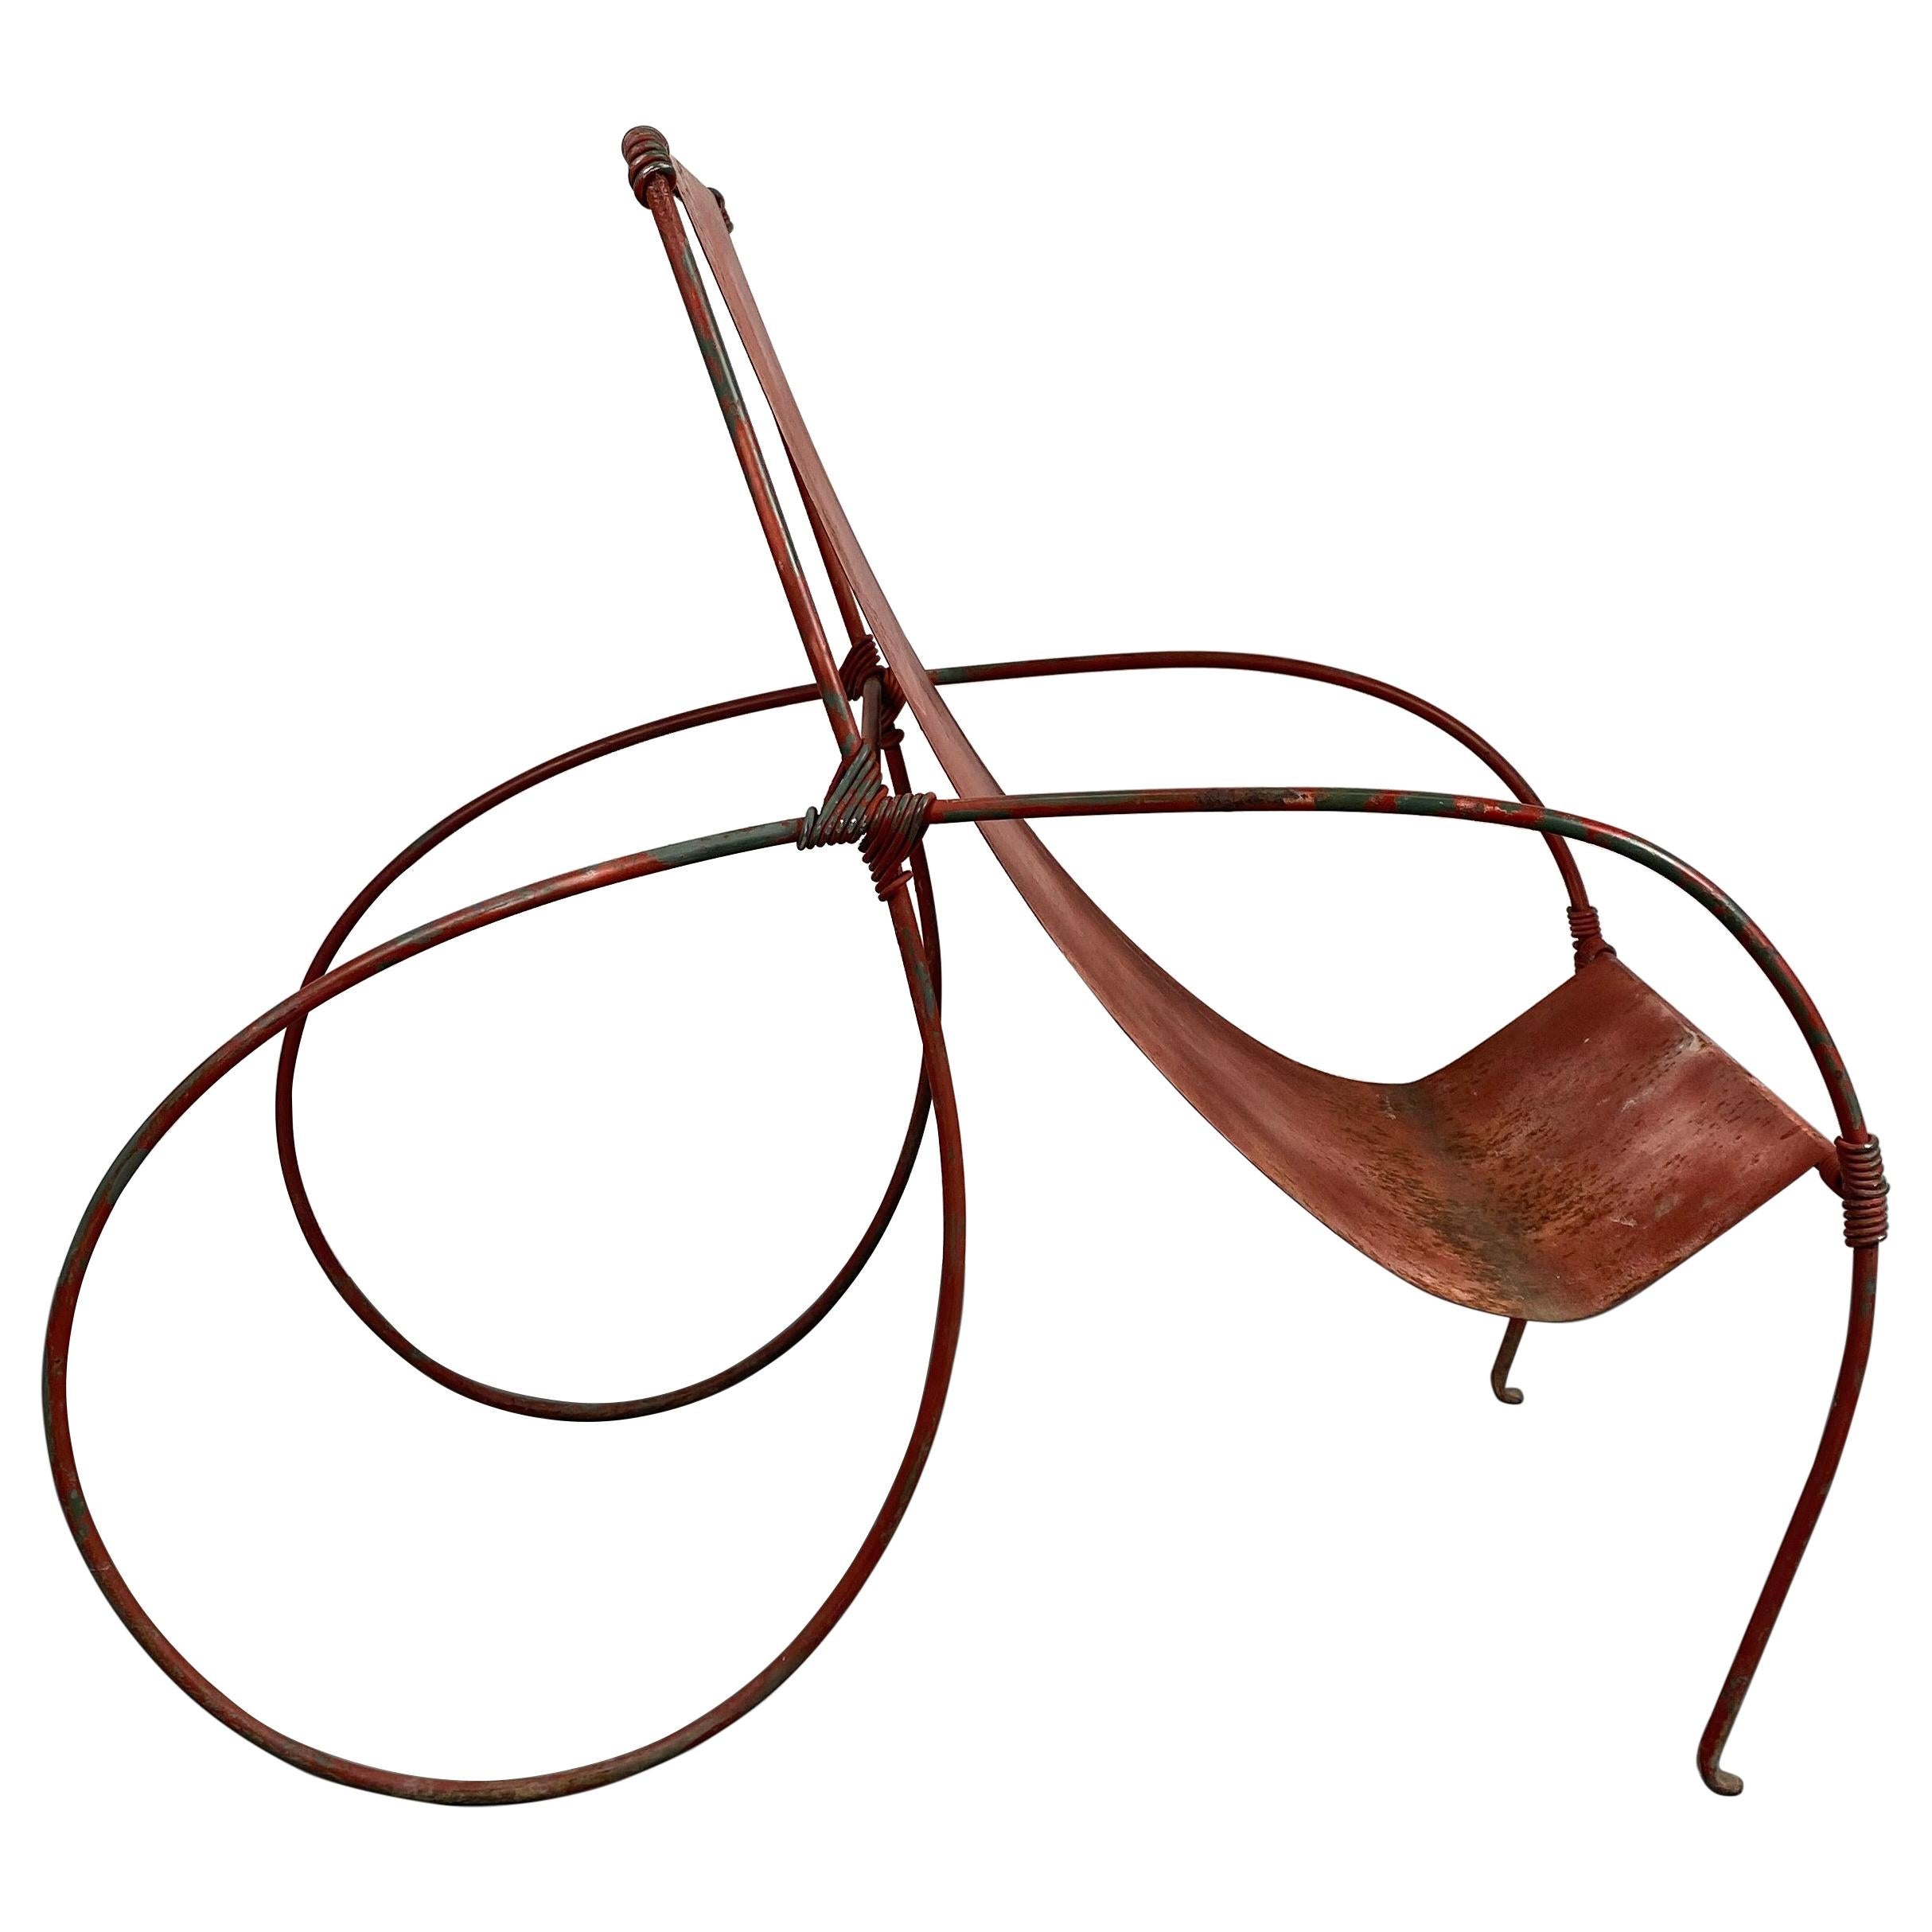 Unusual Sculptural Iron Garden Lounge Chair Manner of Jean-Charles Moreux For Sale